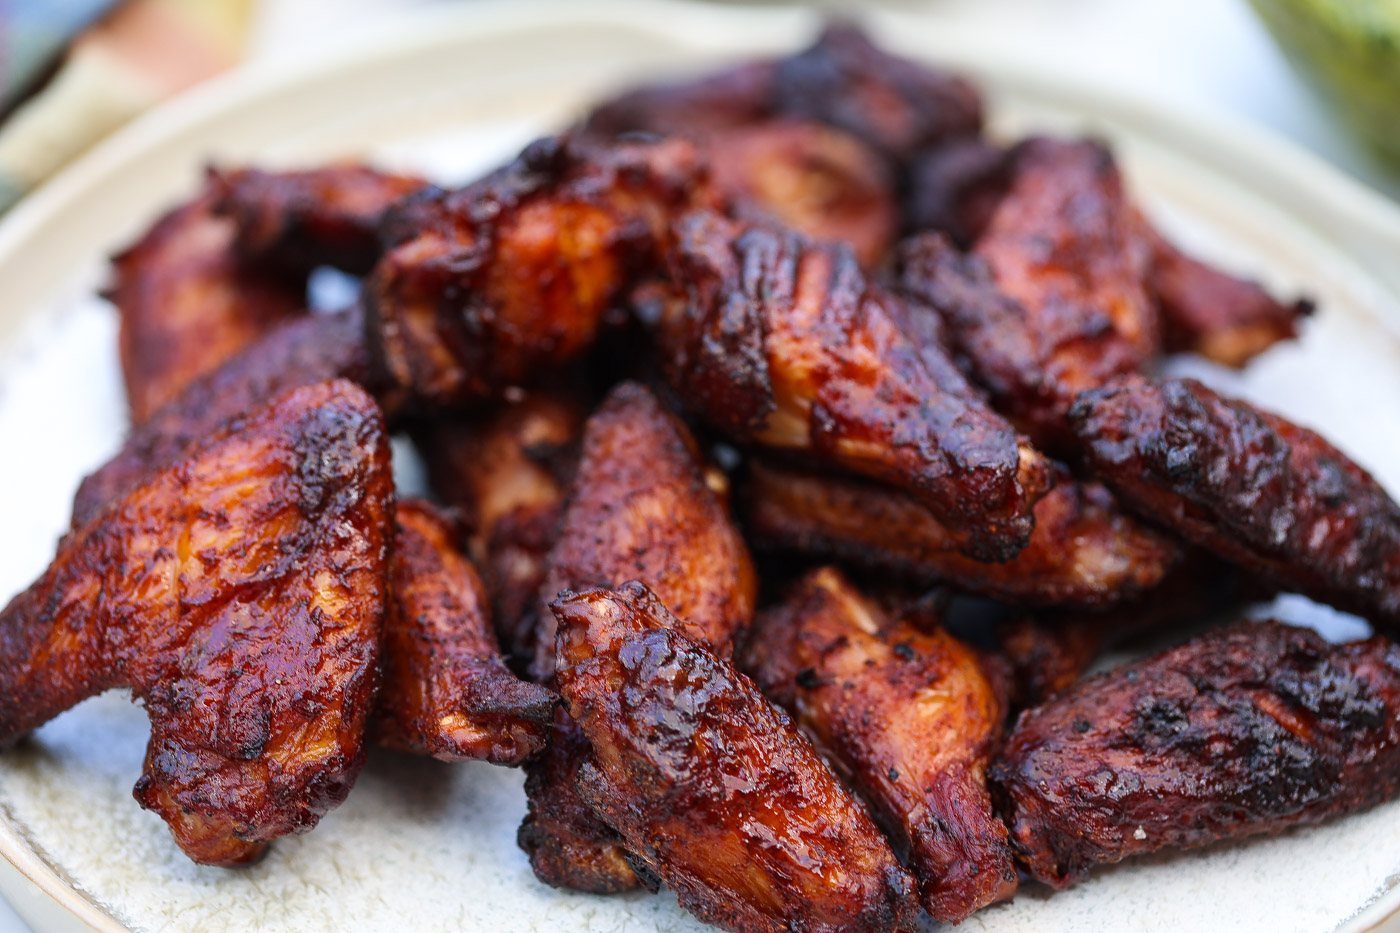 https://www.foodfidelity.com/wp-content/uploads/2023/05/smoked-wings-hor-tight-1.jpg